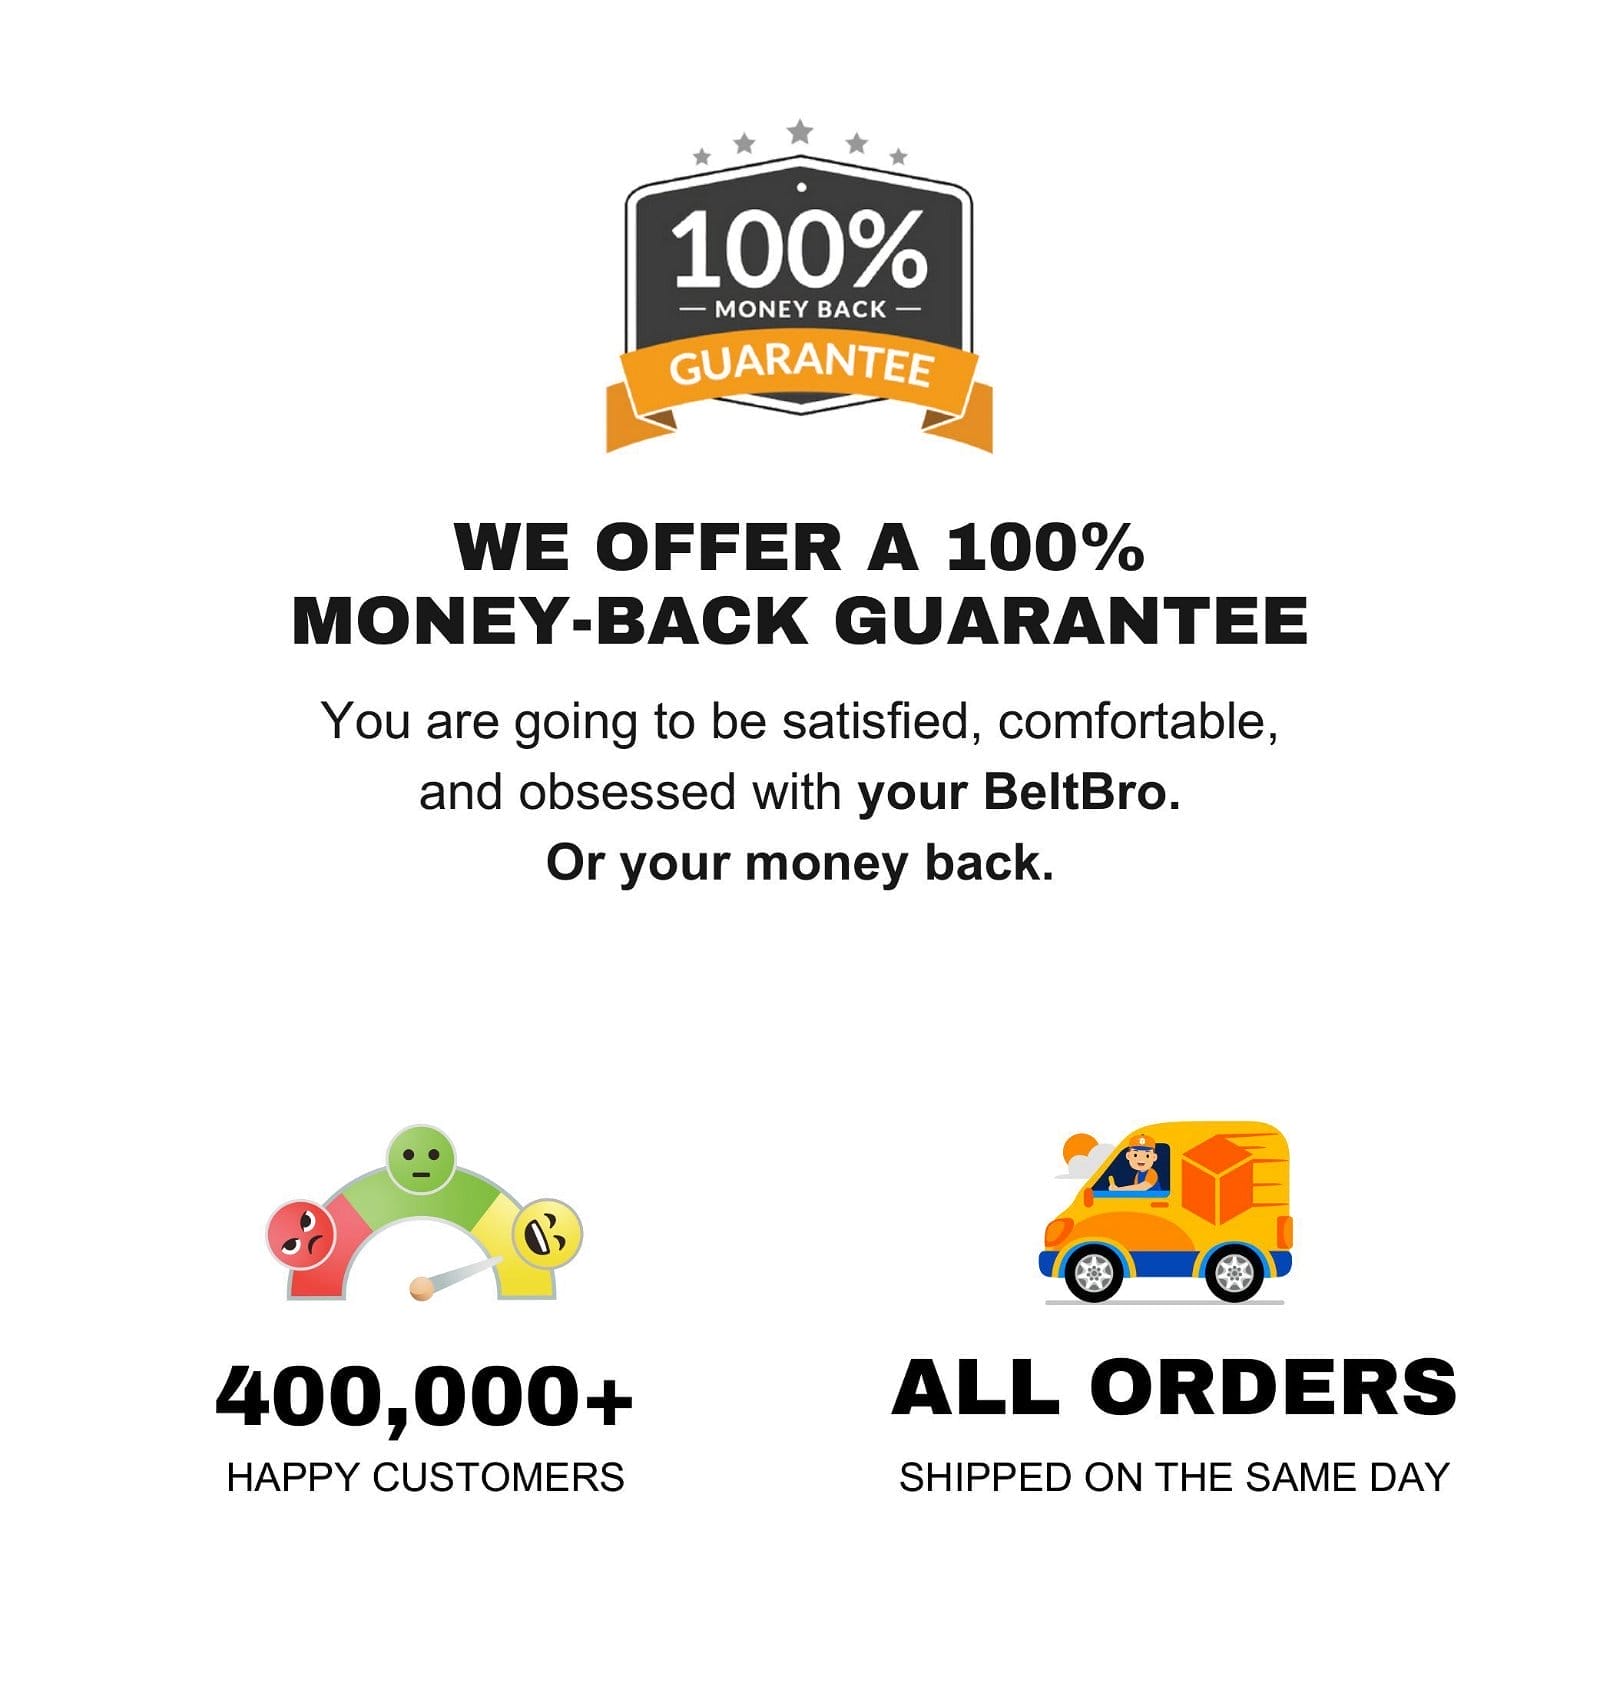 WE OFFER A 100% MONEY-BACK GUARANTEE. All our orders are shipped within the same day.